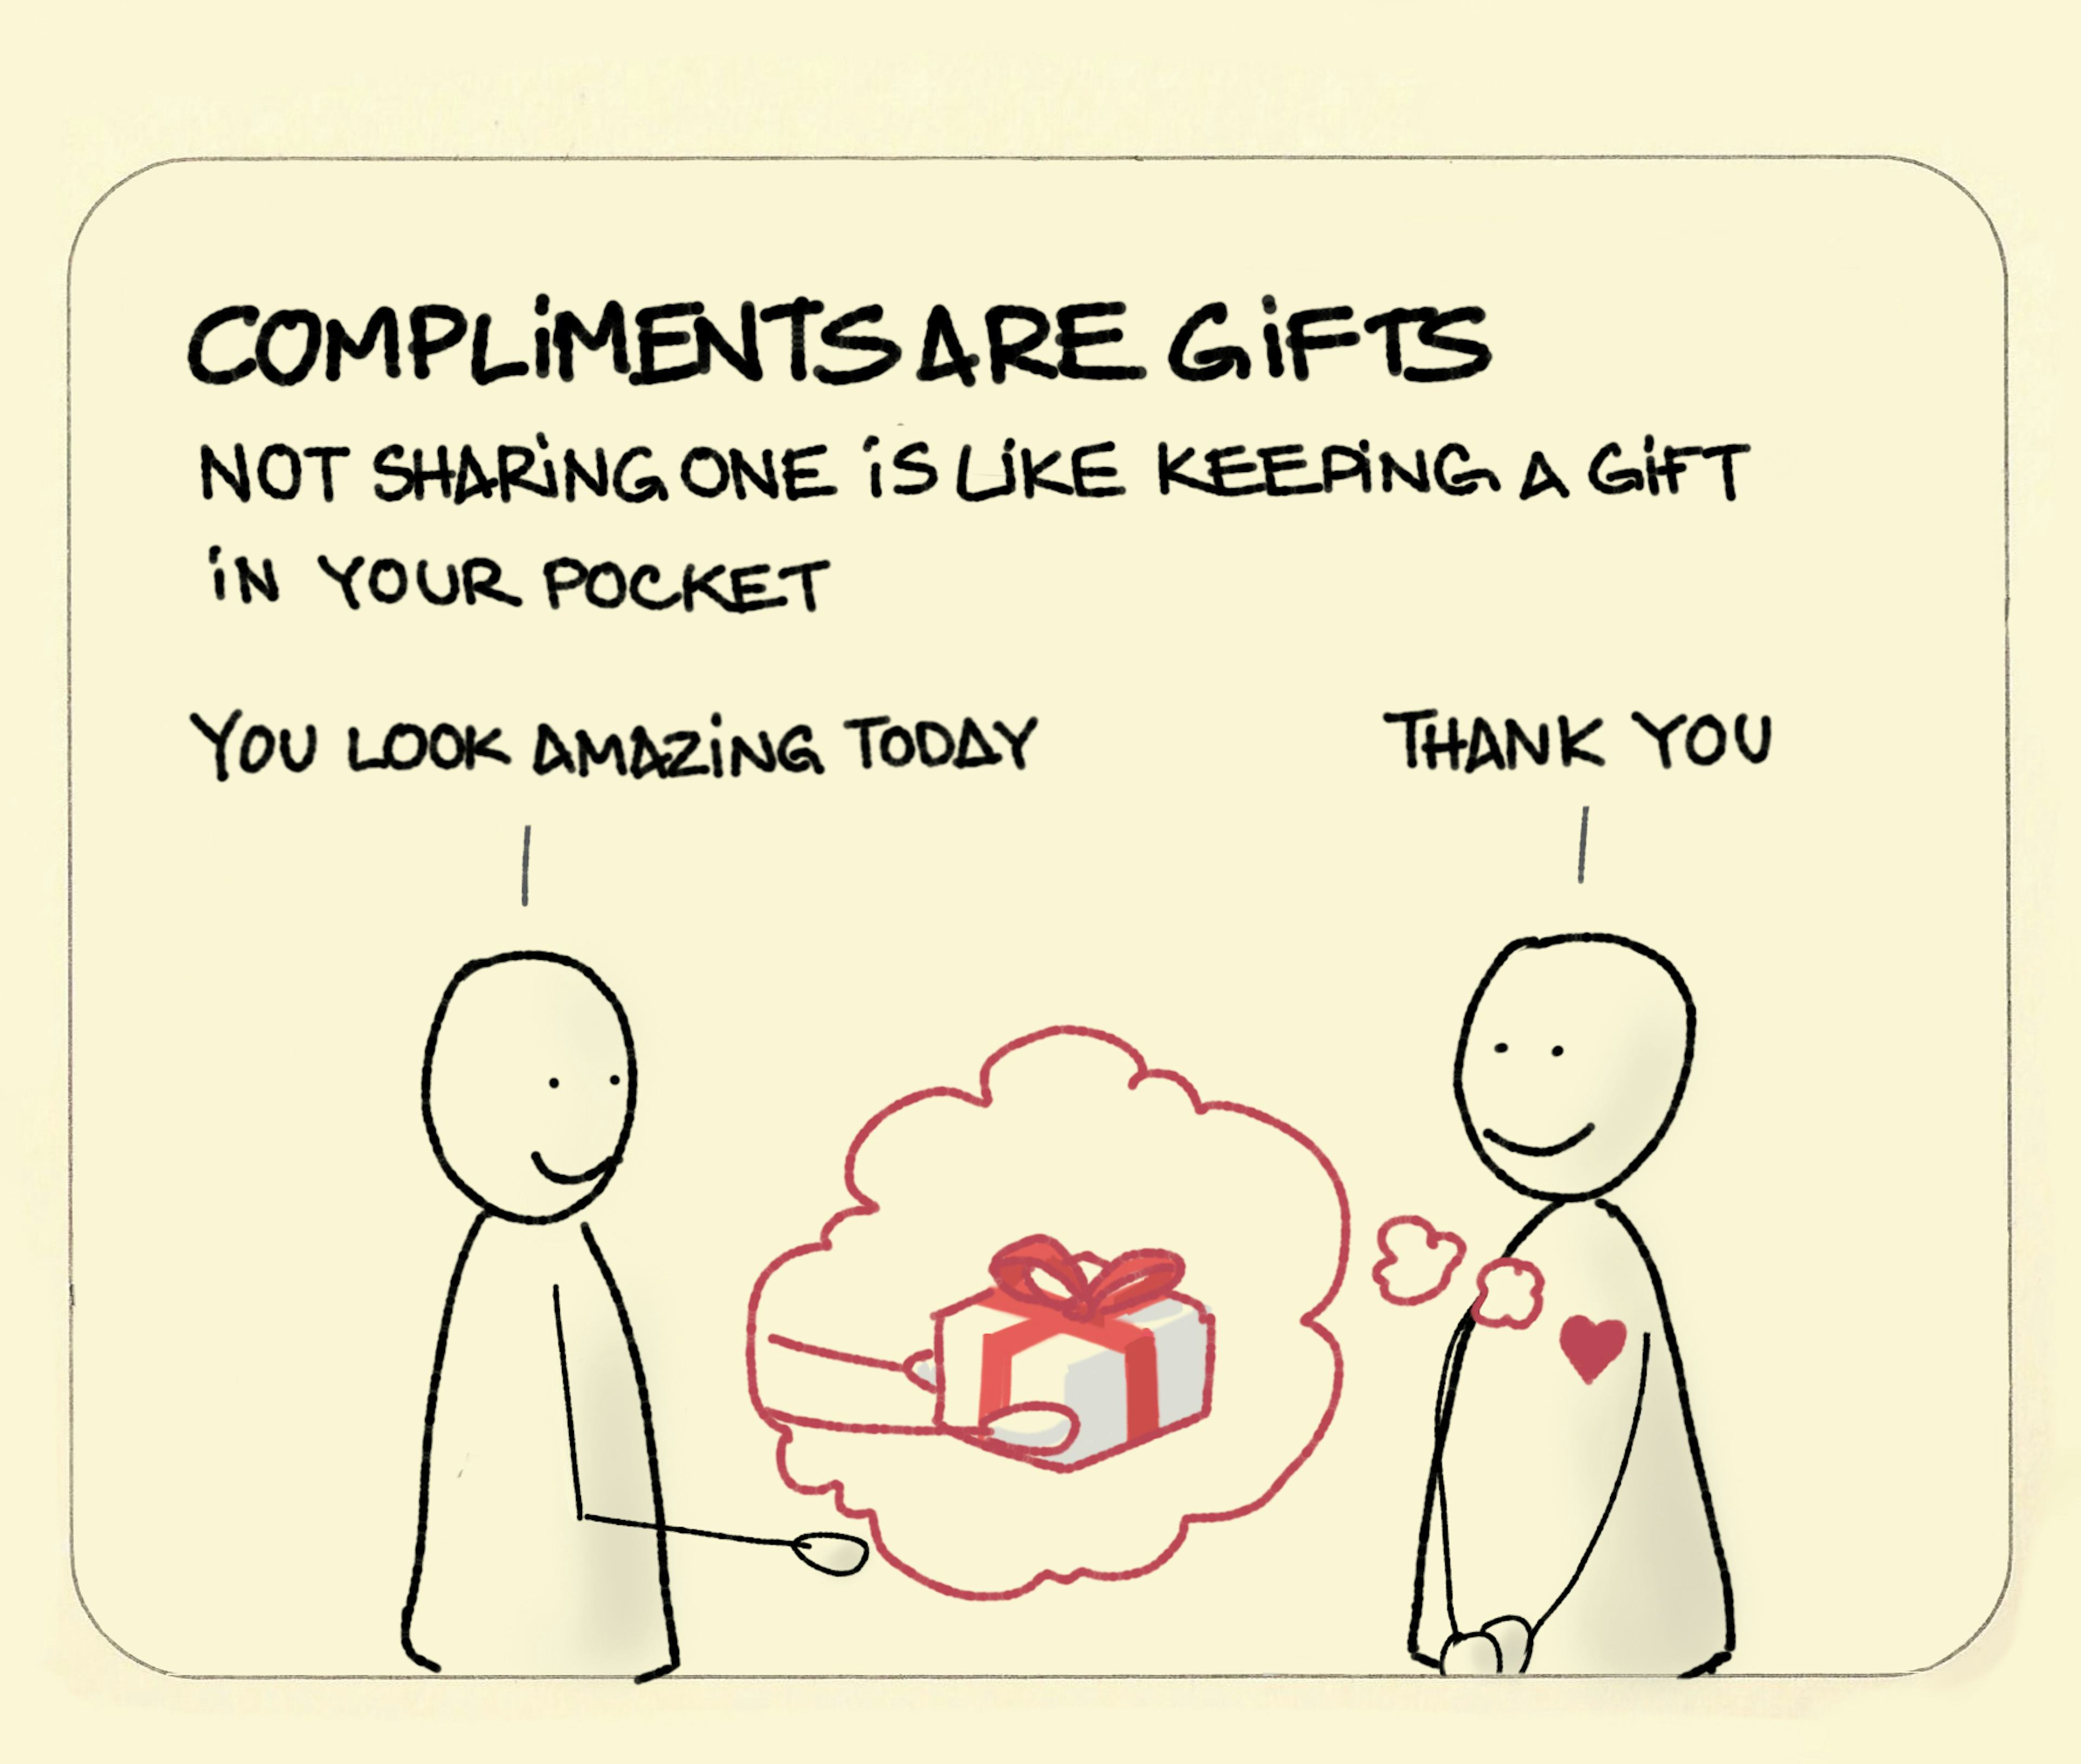 Compliments are gifts sketch showing someone sharing a compliment and the receiver feeling like they're receiving a gift